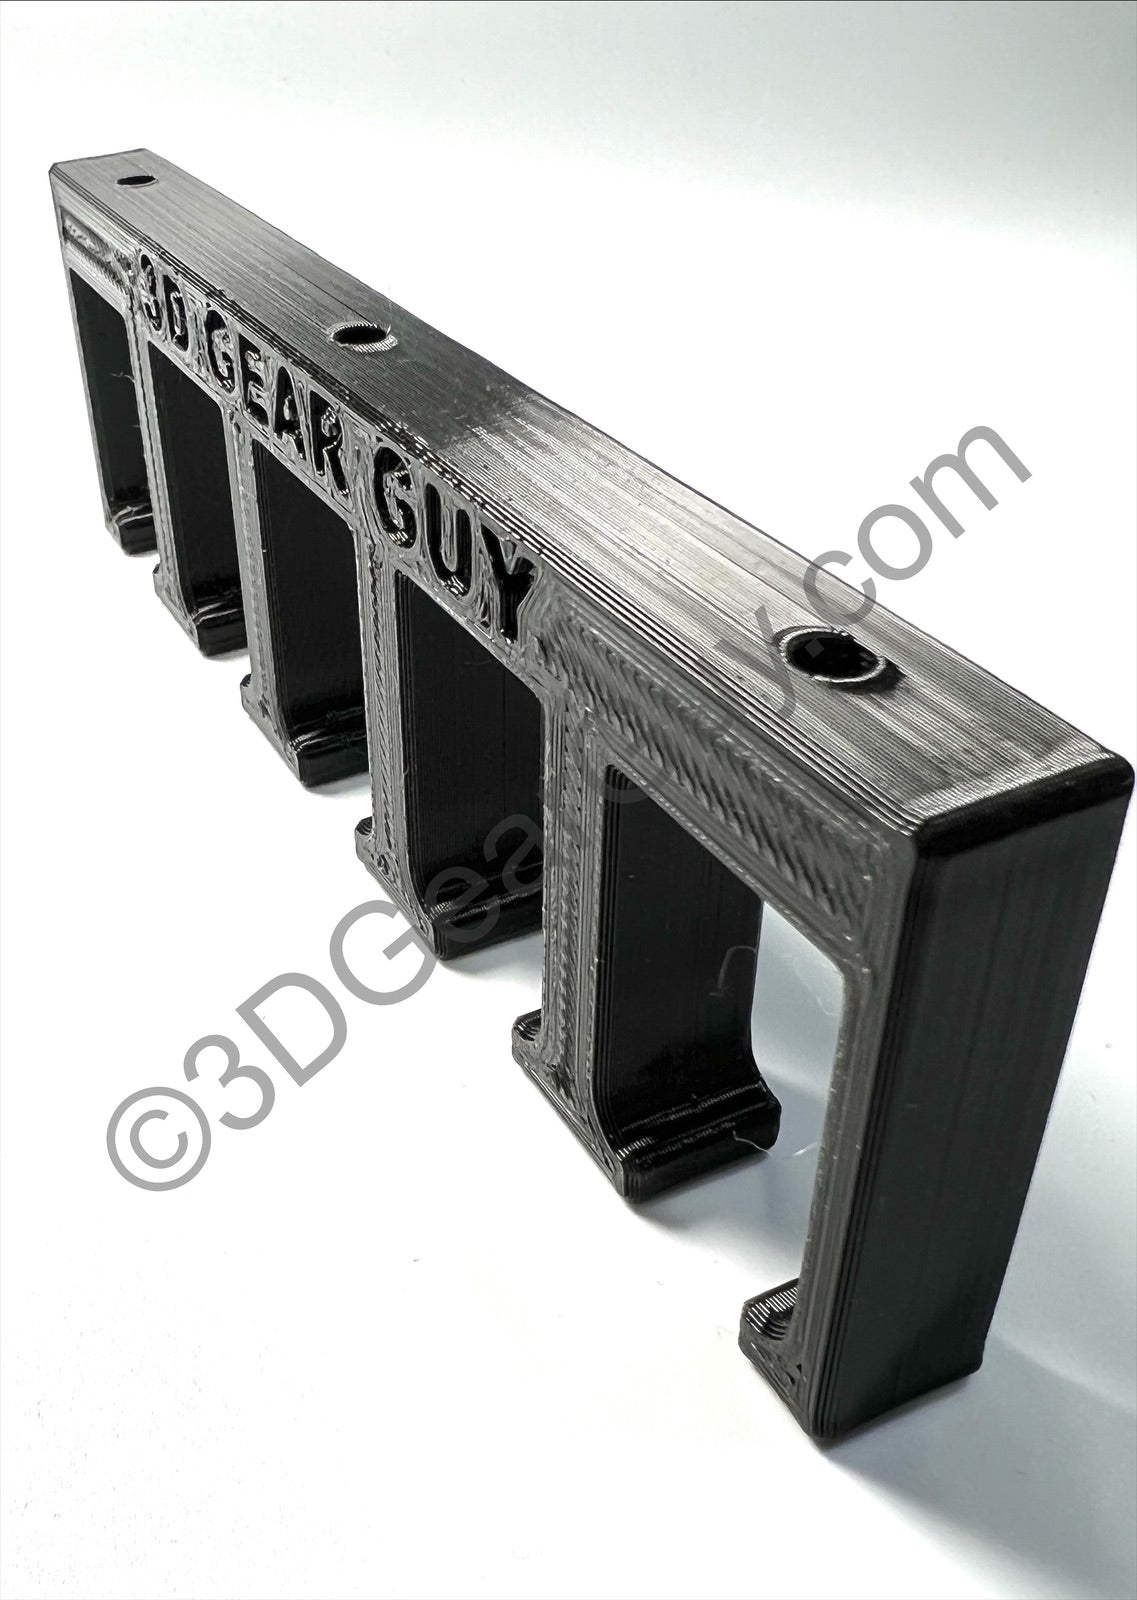 Double stack mag rack